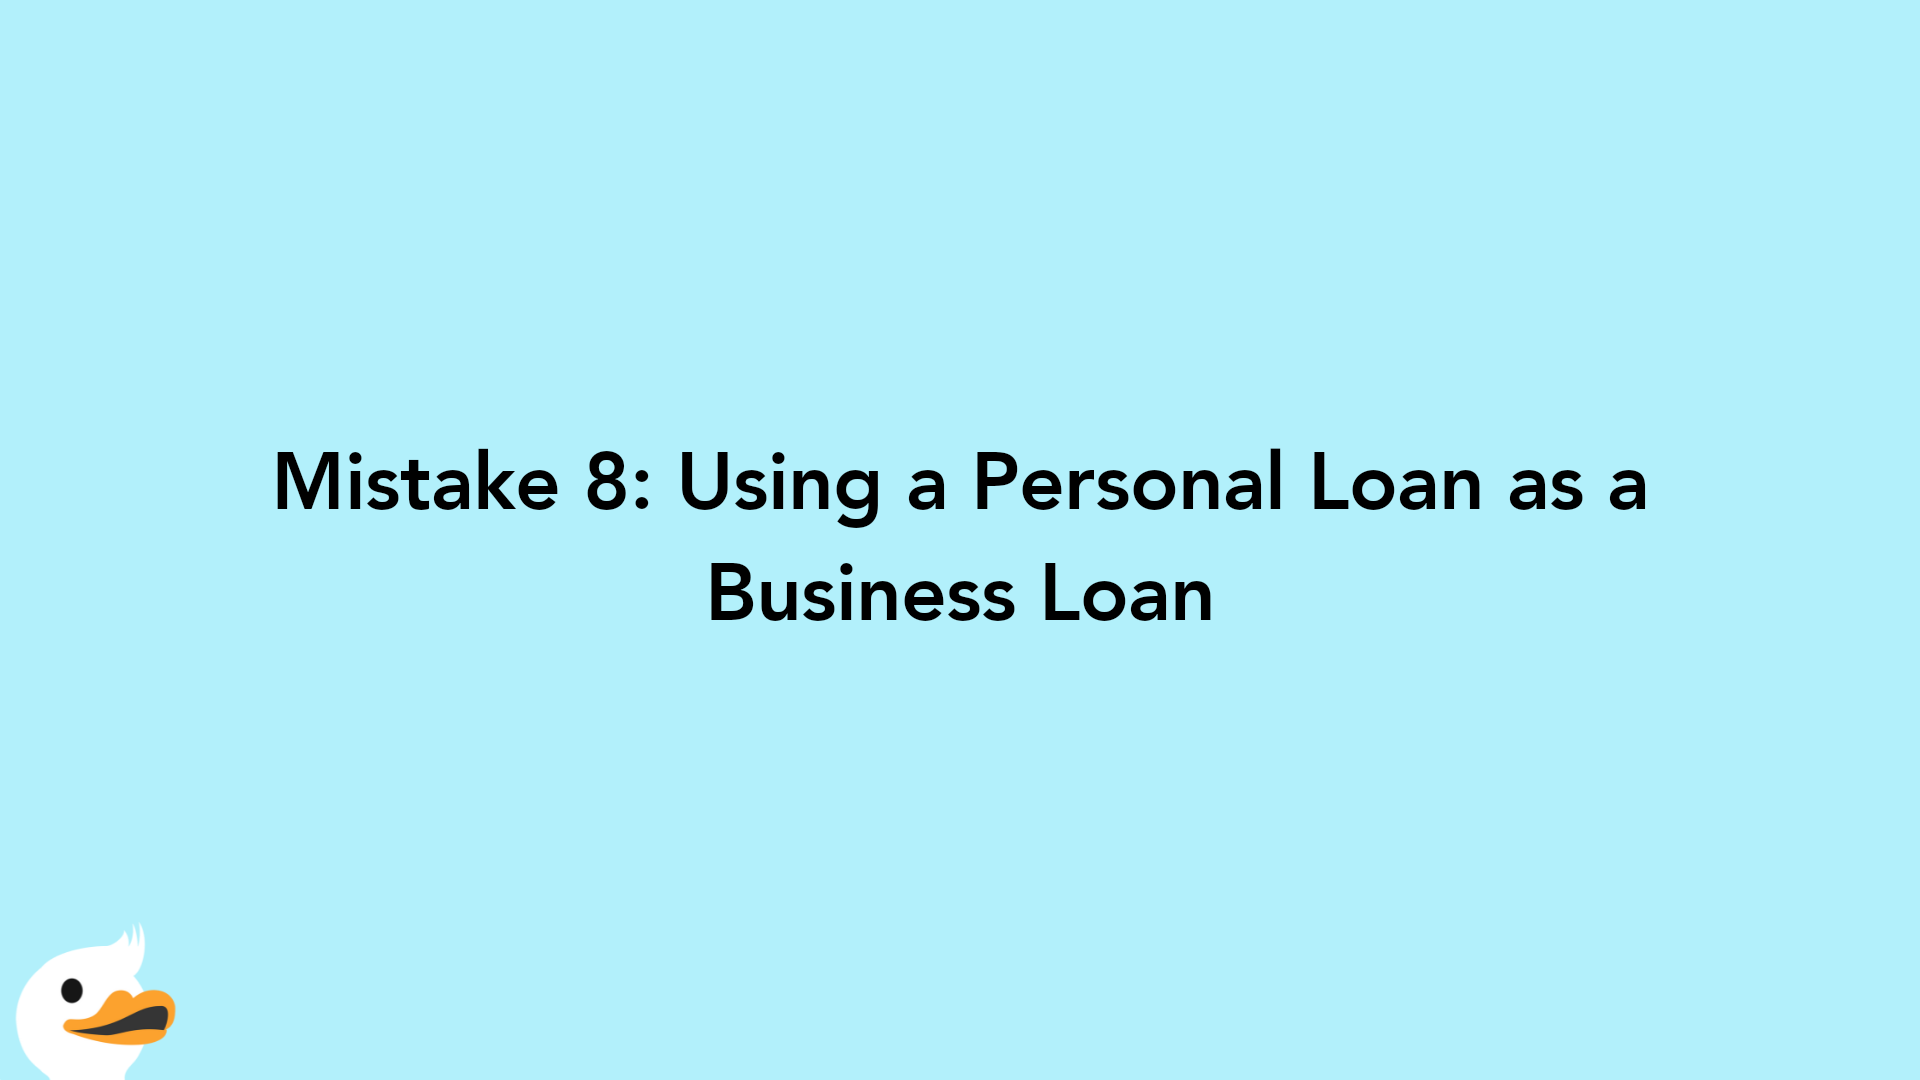 Mistake 8: Using a Personal Loan as a Business Loan